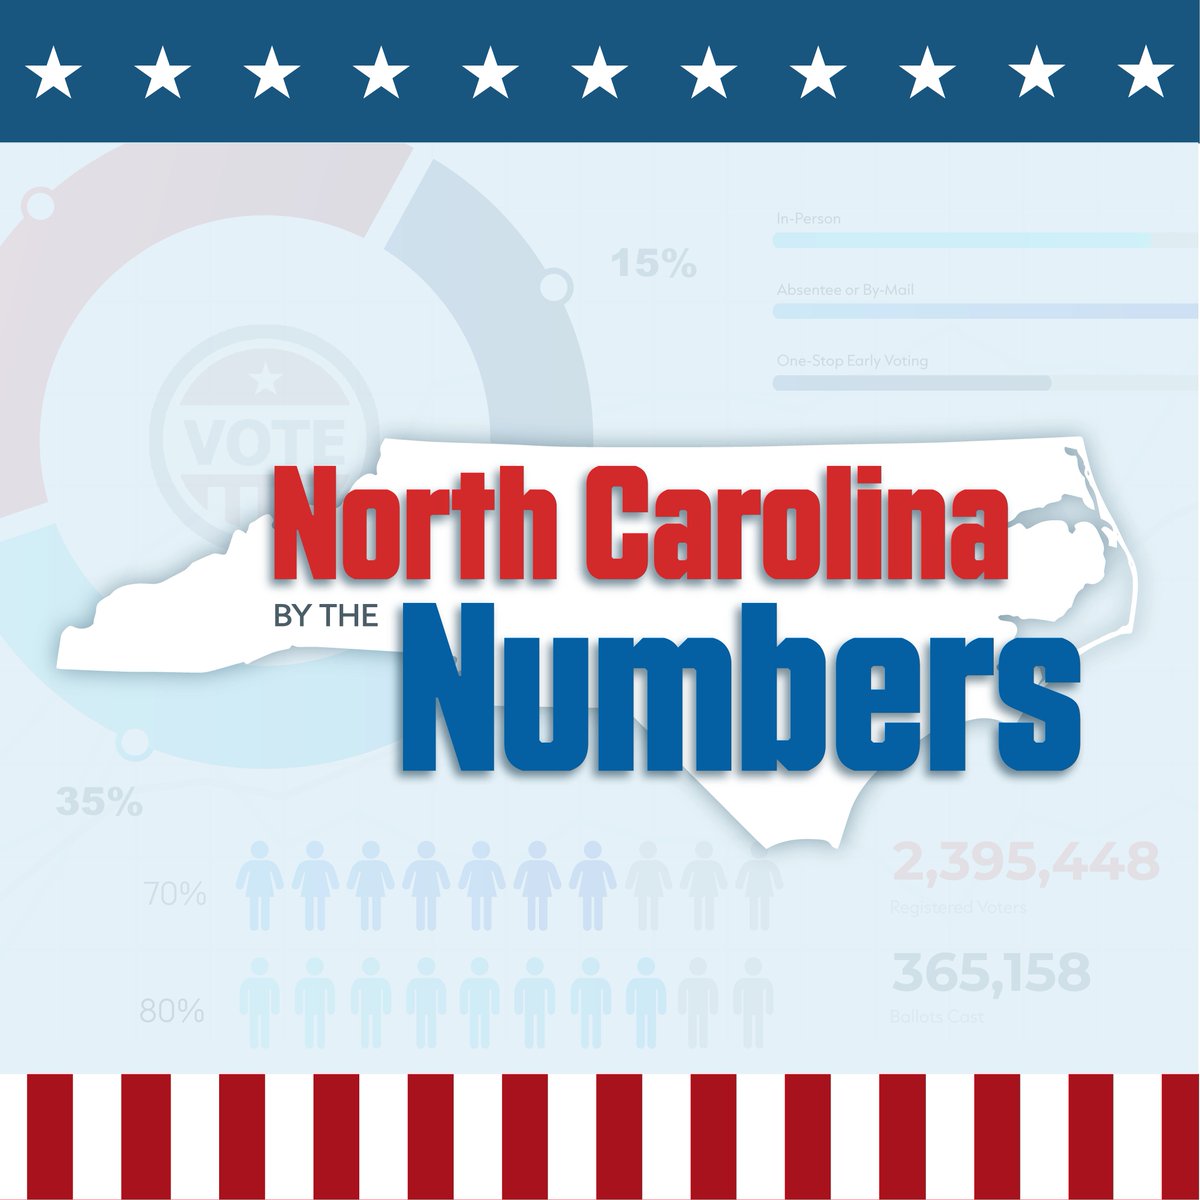 📈 Interested in North Carolina voter data? Browse our Results & Data webpage here: bit.ly/4aY5Sm9 NC election data is often touted as the best and most transparent in the nation! 👍 #YourVoteCountsNC #NCpol